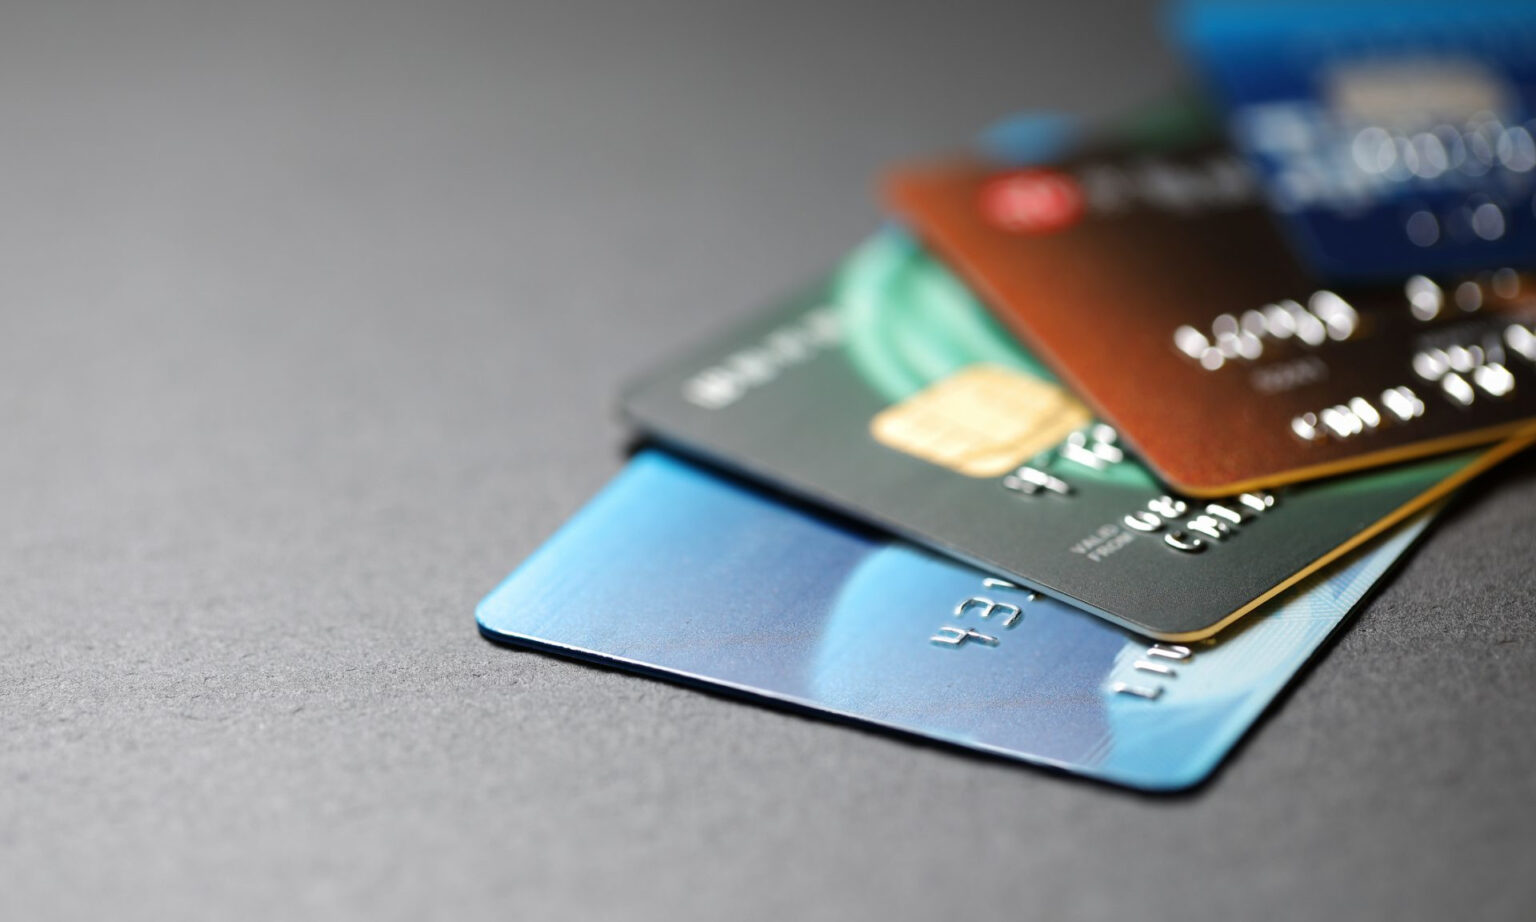 If you're a business utilizing company credit cards, it's crucial to find a way to protect your data. Learn more about PCI DSS compliance right now.